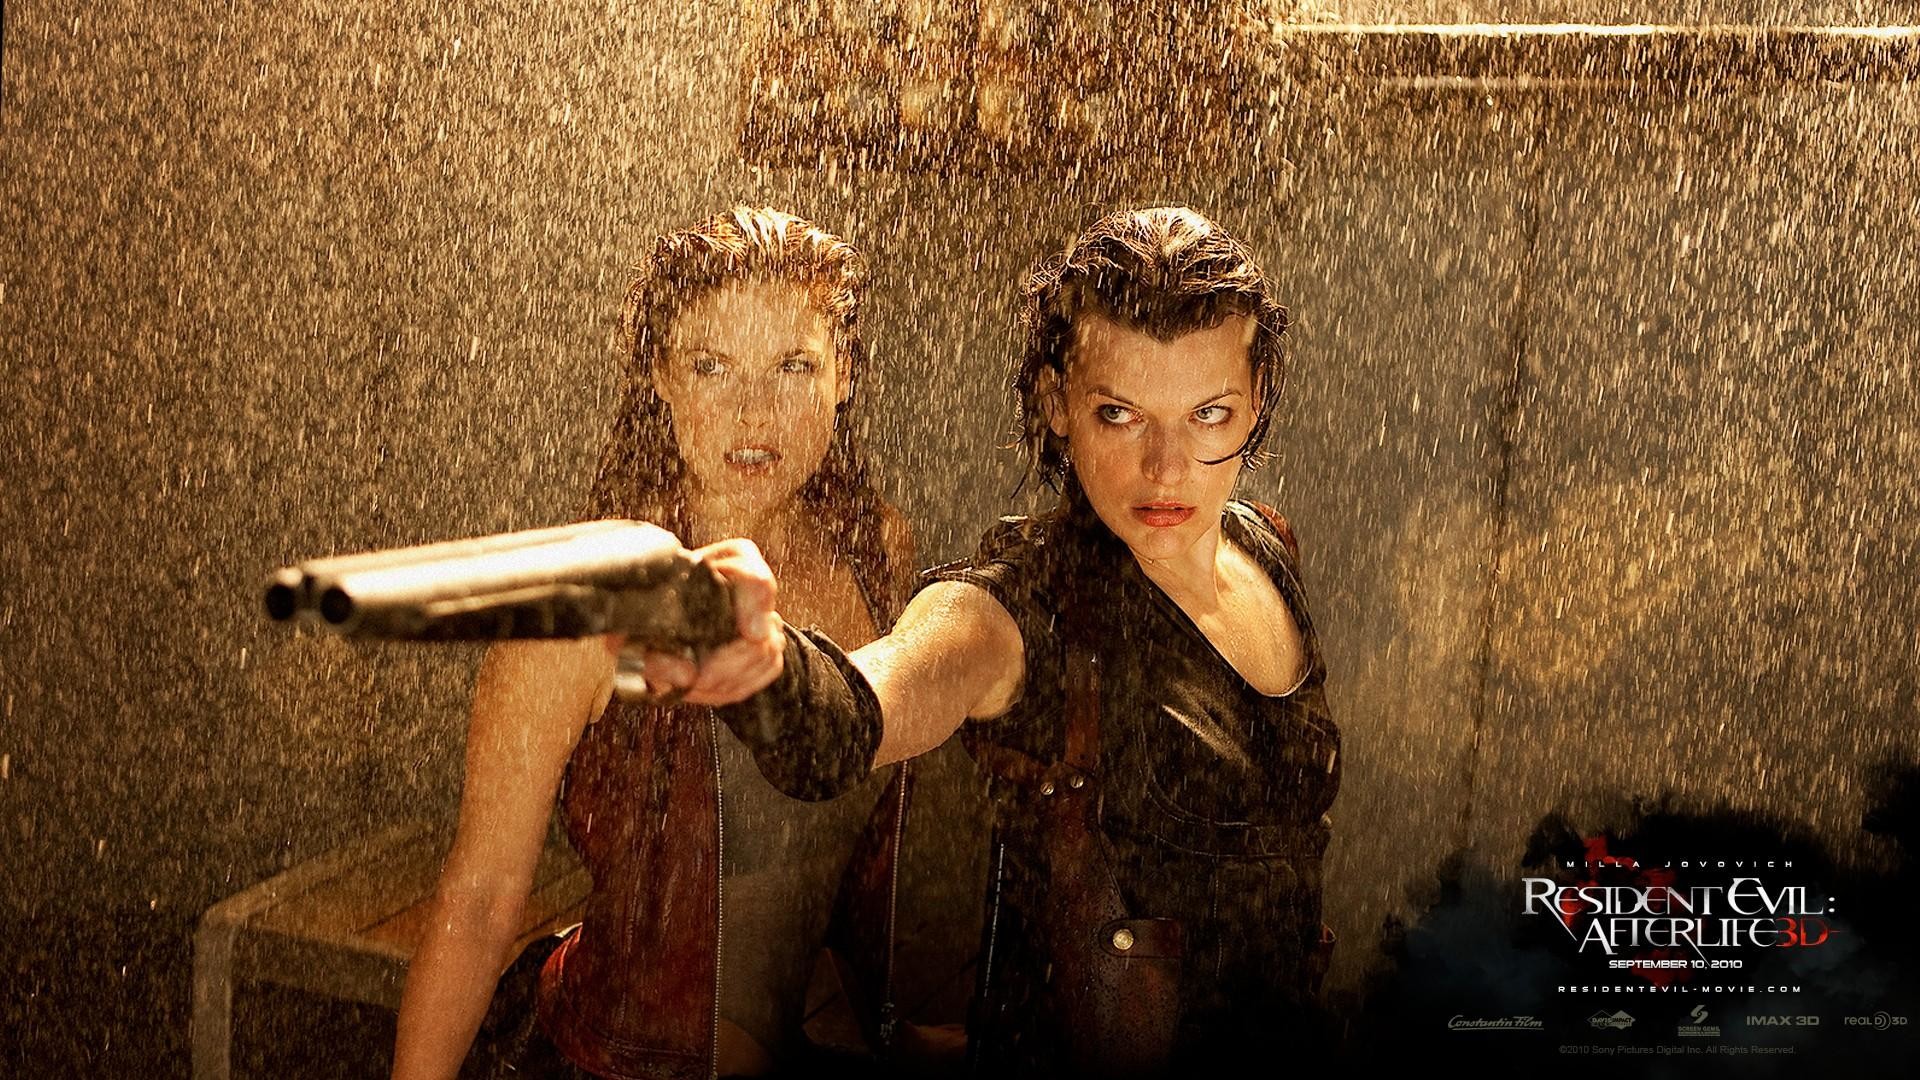 1920x1080 claire redfield wallpaper #771323 movies resident evil afterlife milla  jovovich alice ...